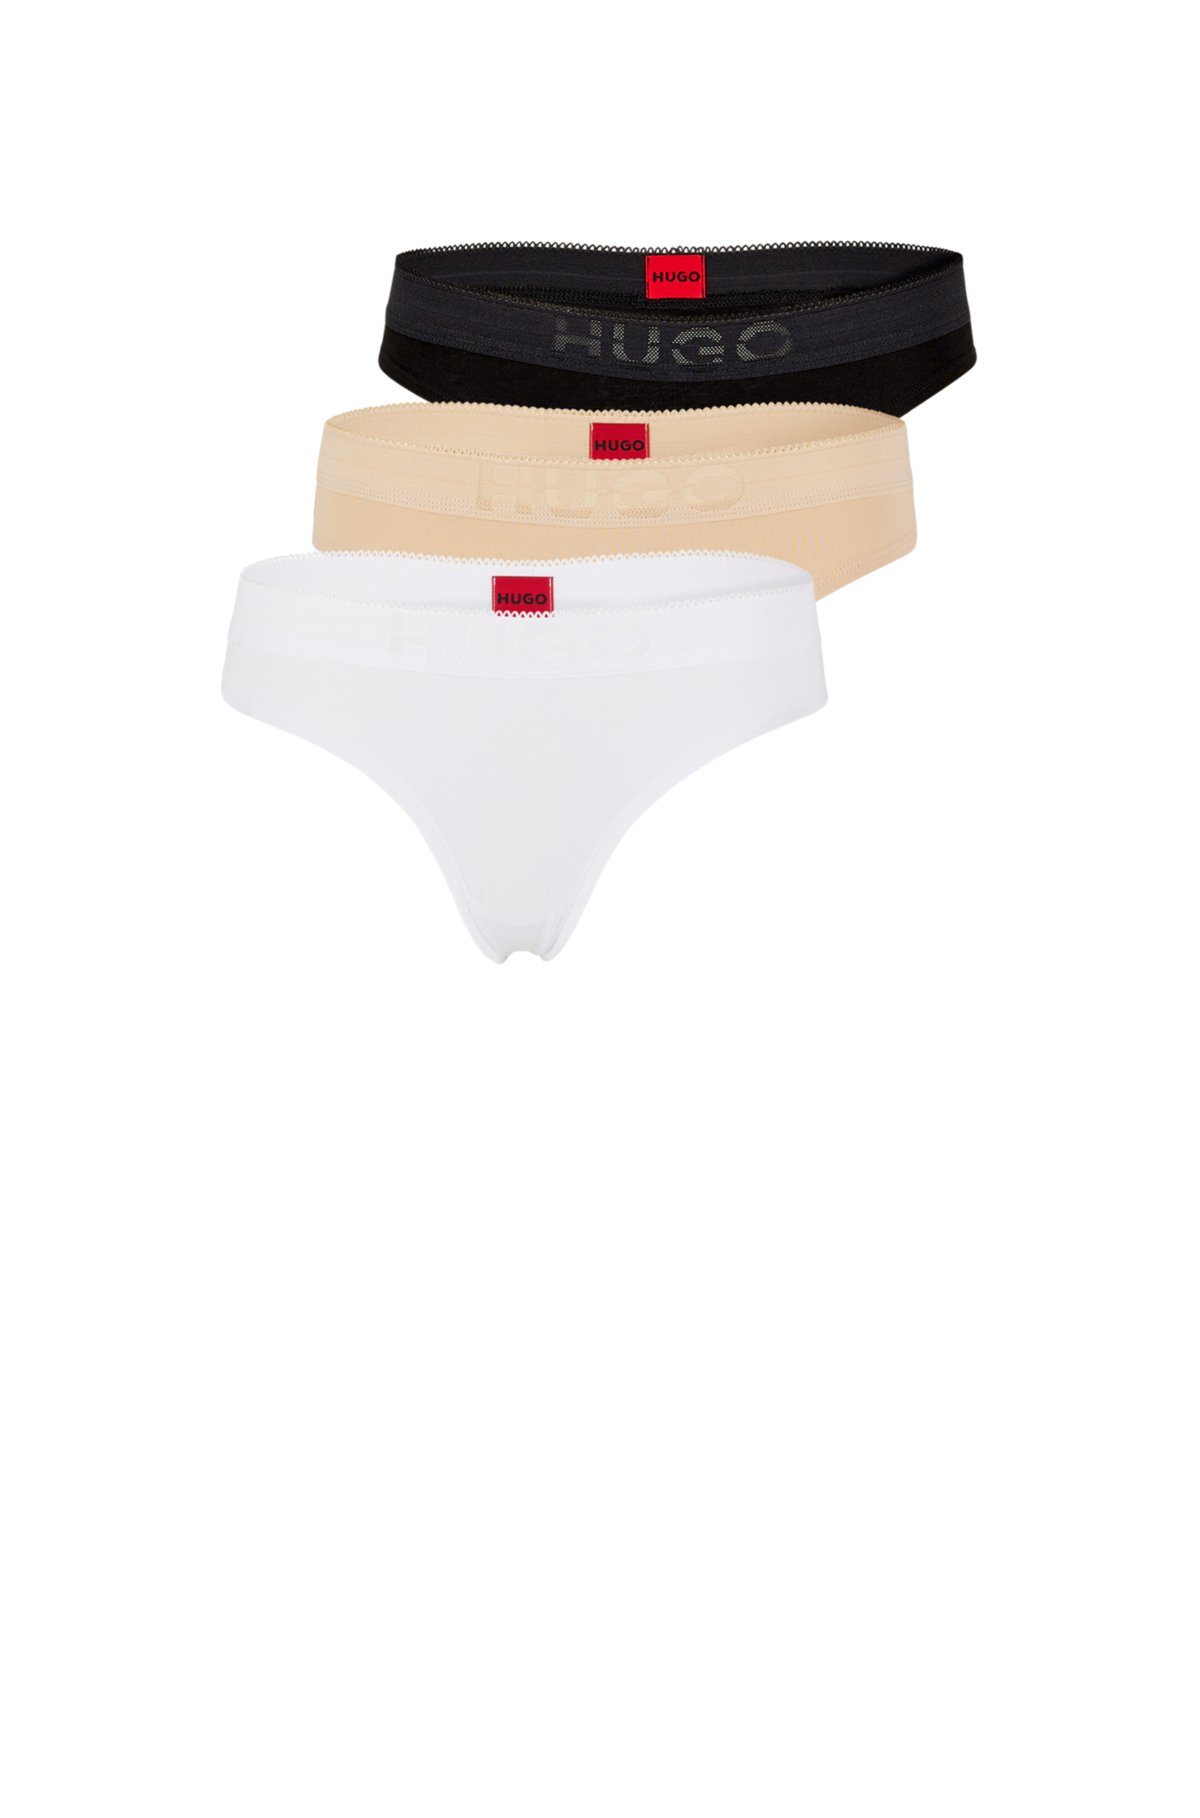 cotton - thongs of stretch logo HUGO in Three-pack